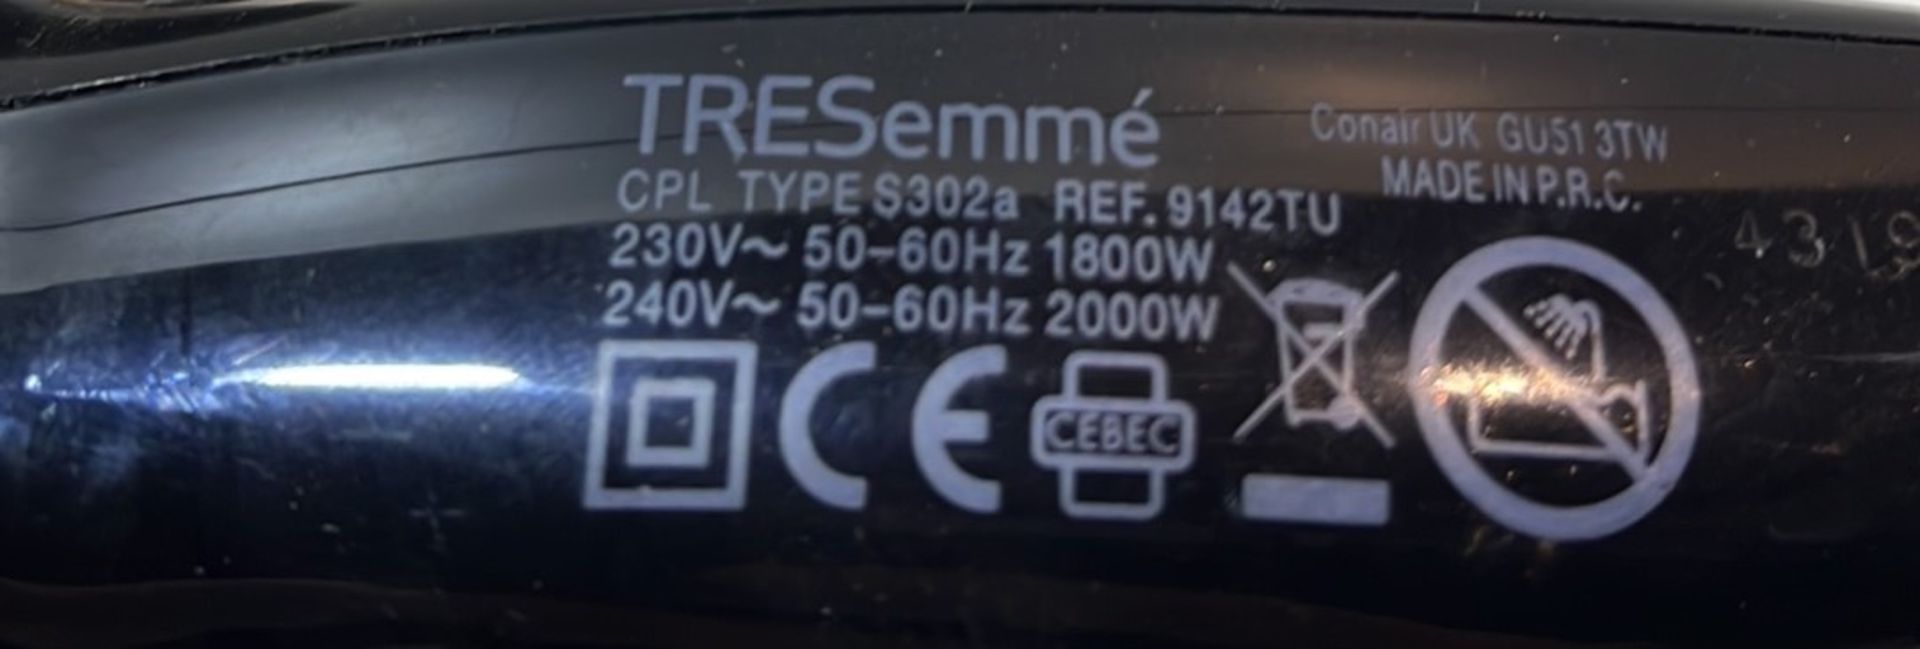 TRESemme S302A Hairdryer - Image 2 of 2